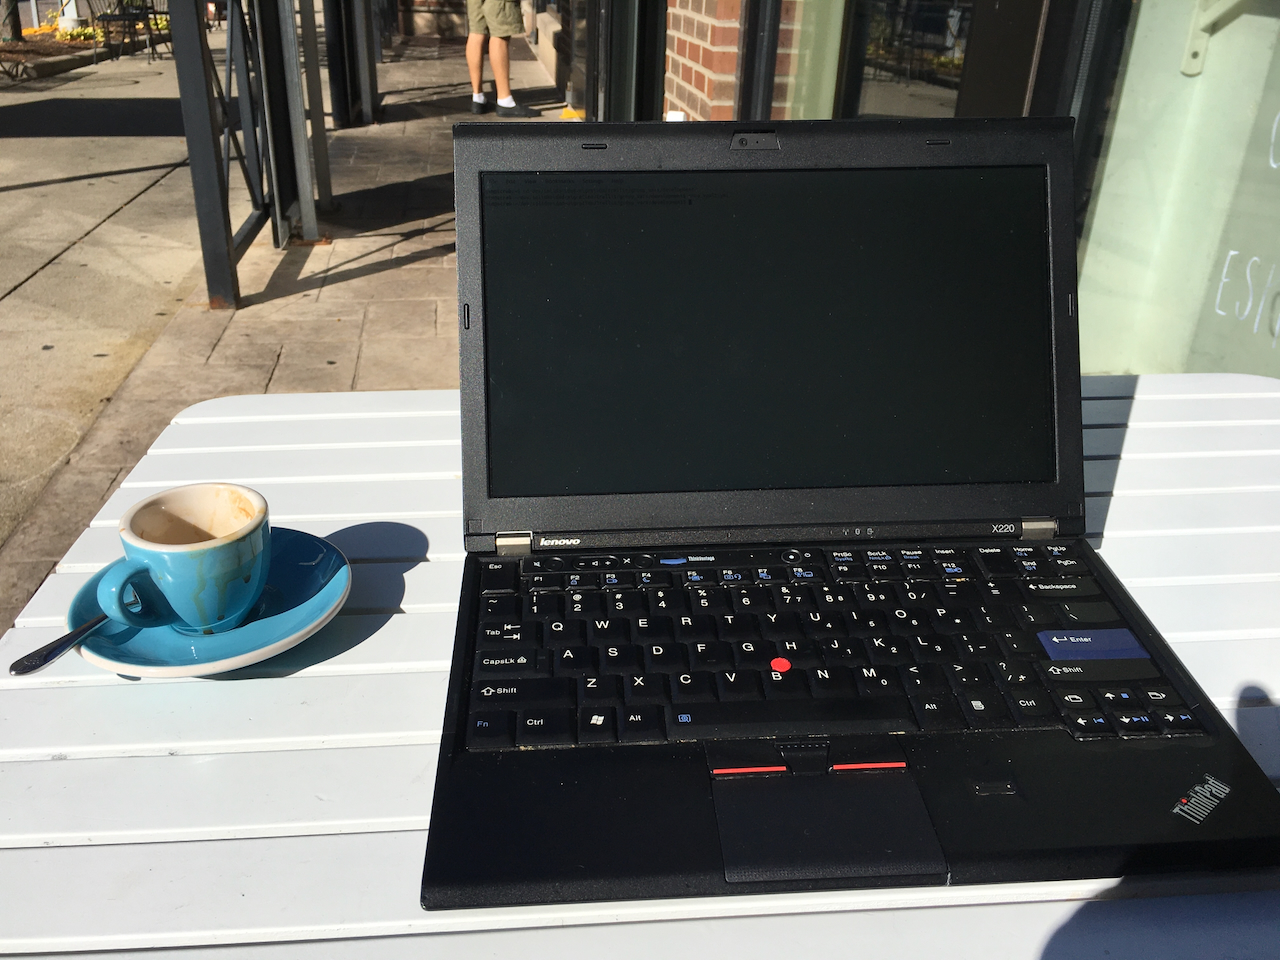 A Thinkpad X220 laptop on a table with an espresso next to it outside on a city street